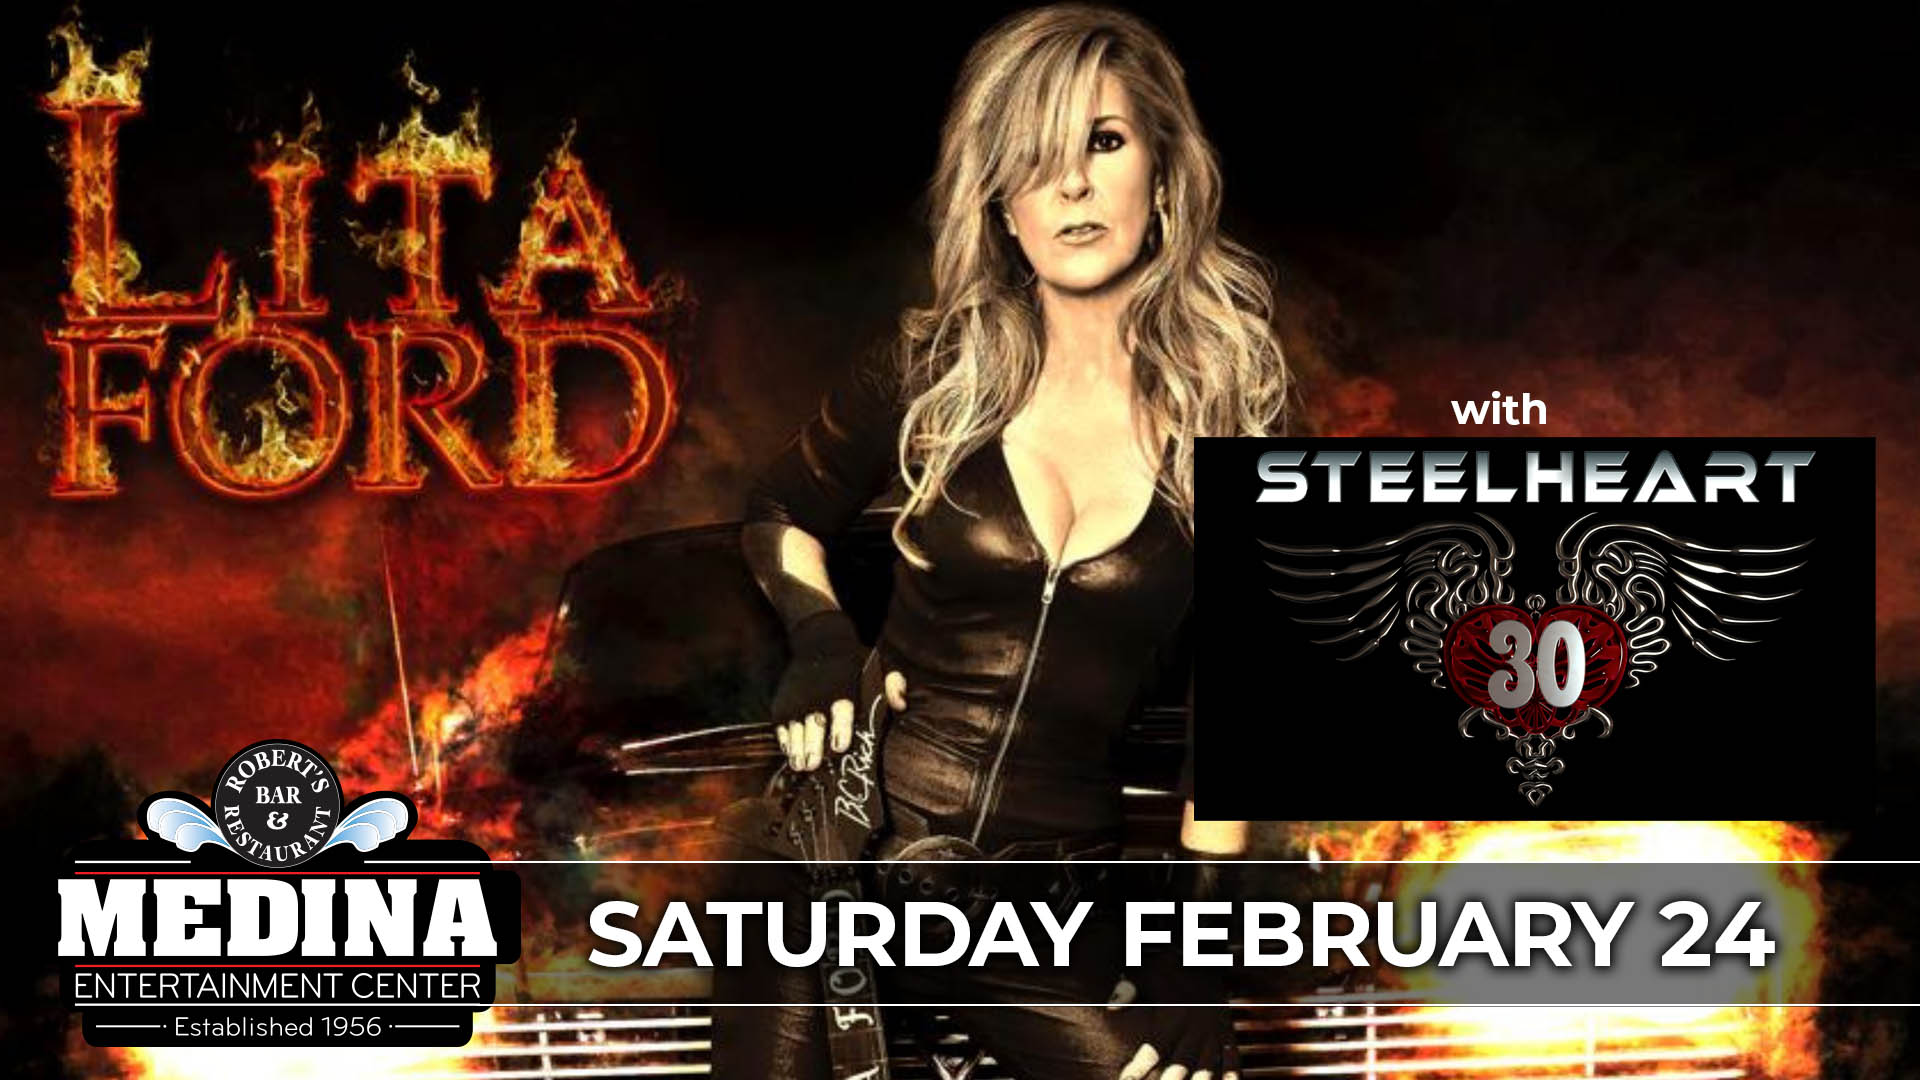 Lita Ford with Steel Heart Medina Entertainment Center Saturday, February 24th, 2024 Doors: 7:00PM | Music: 8:00PM | 21+ Tickets on-sale Friday, December 15TH at 11AM General Seating $39 / Silver Reserved $46 / Gold Reserved $51 plus applicable fees